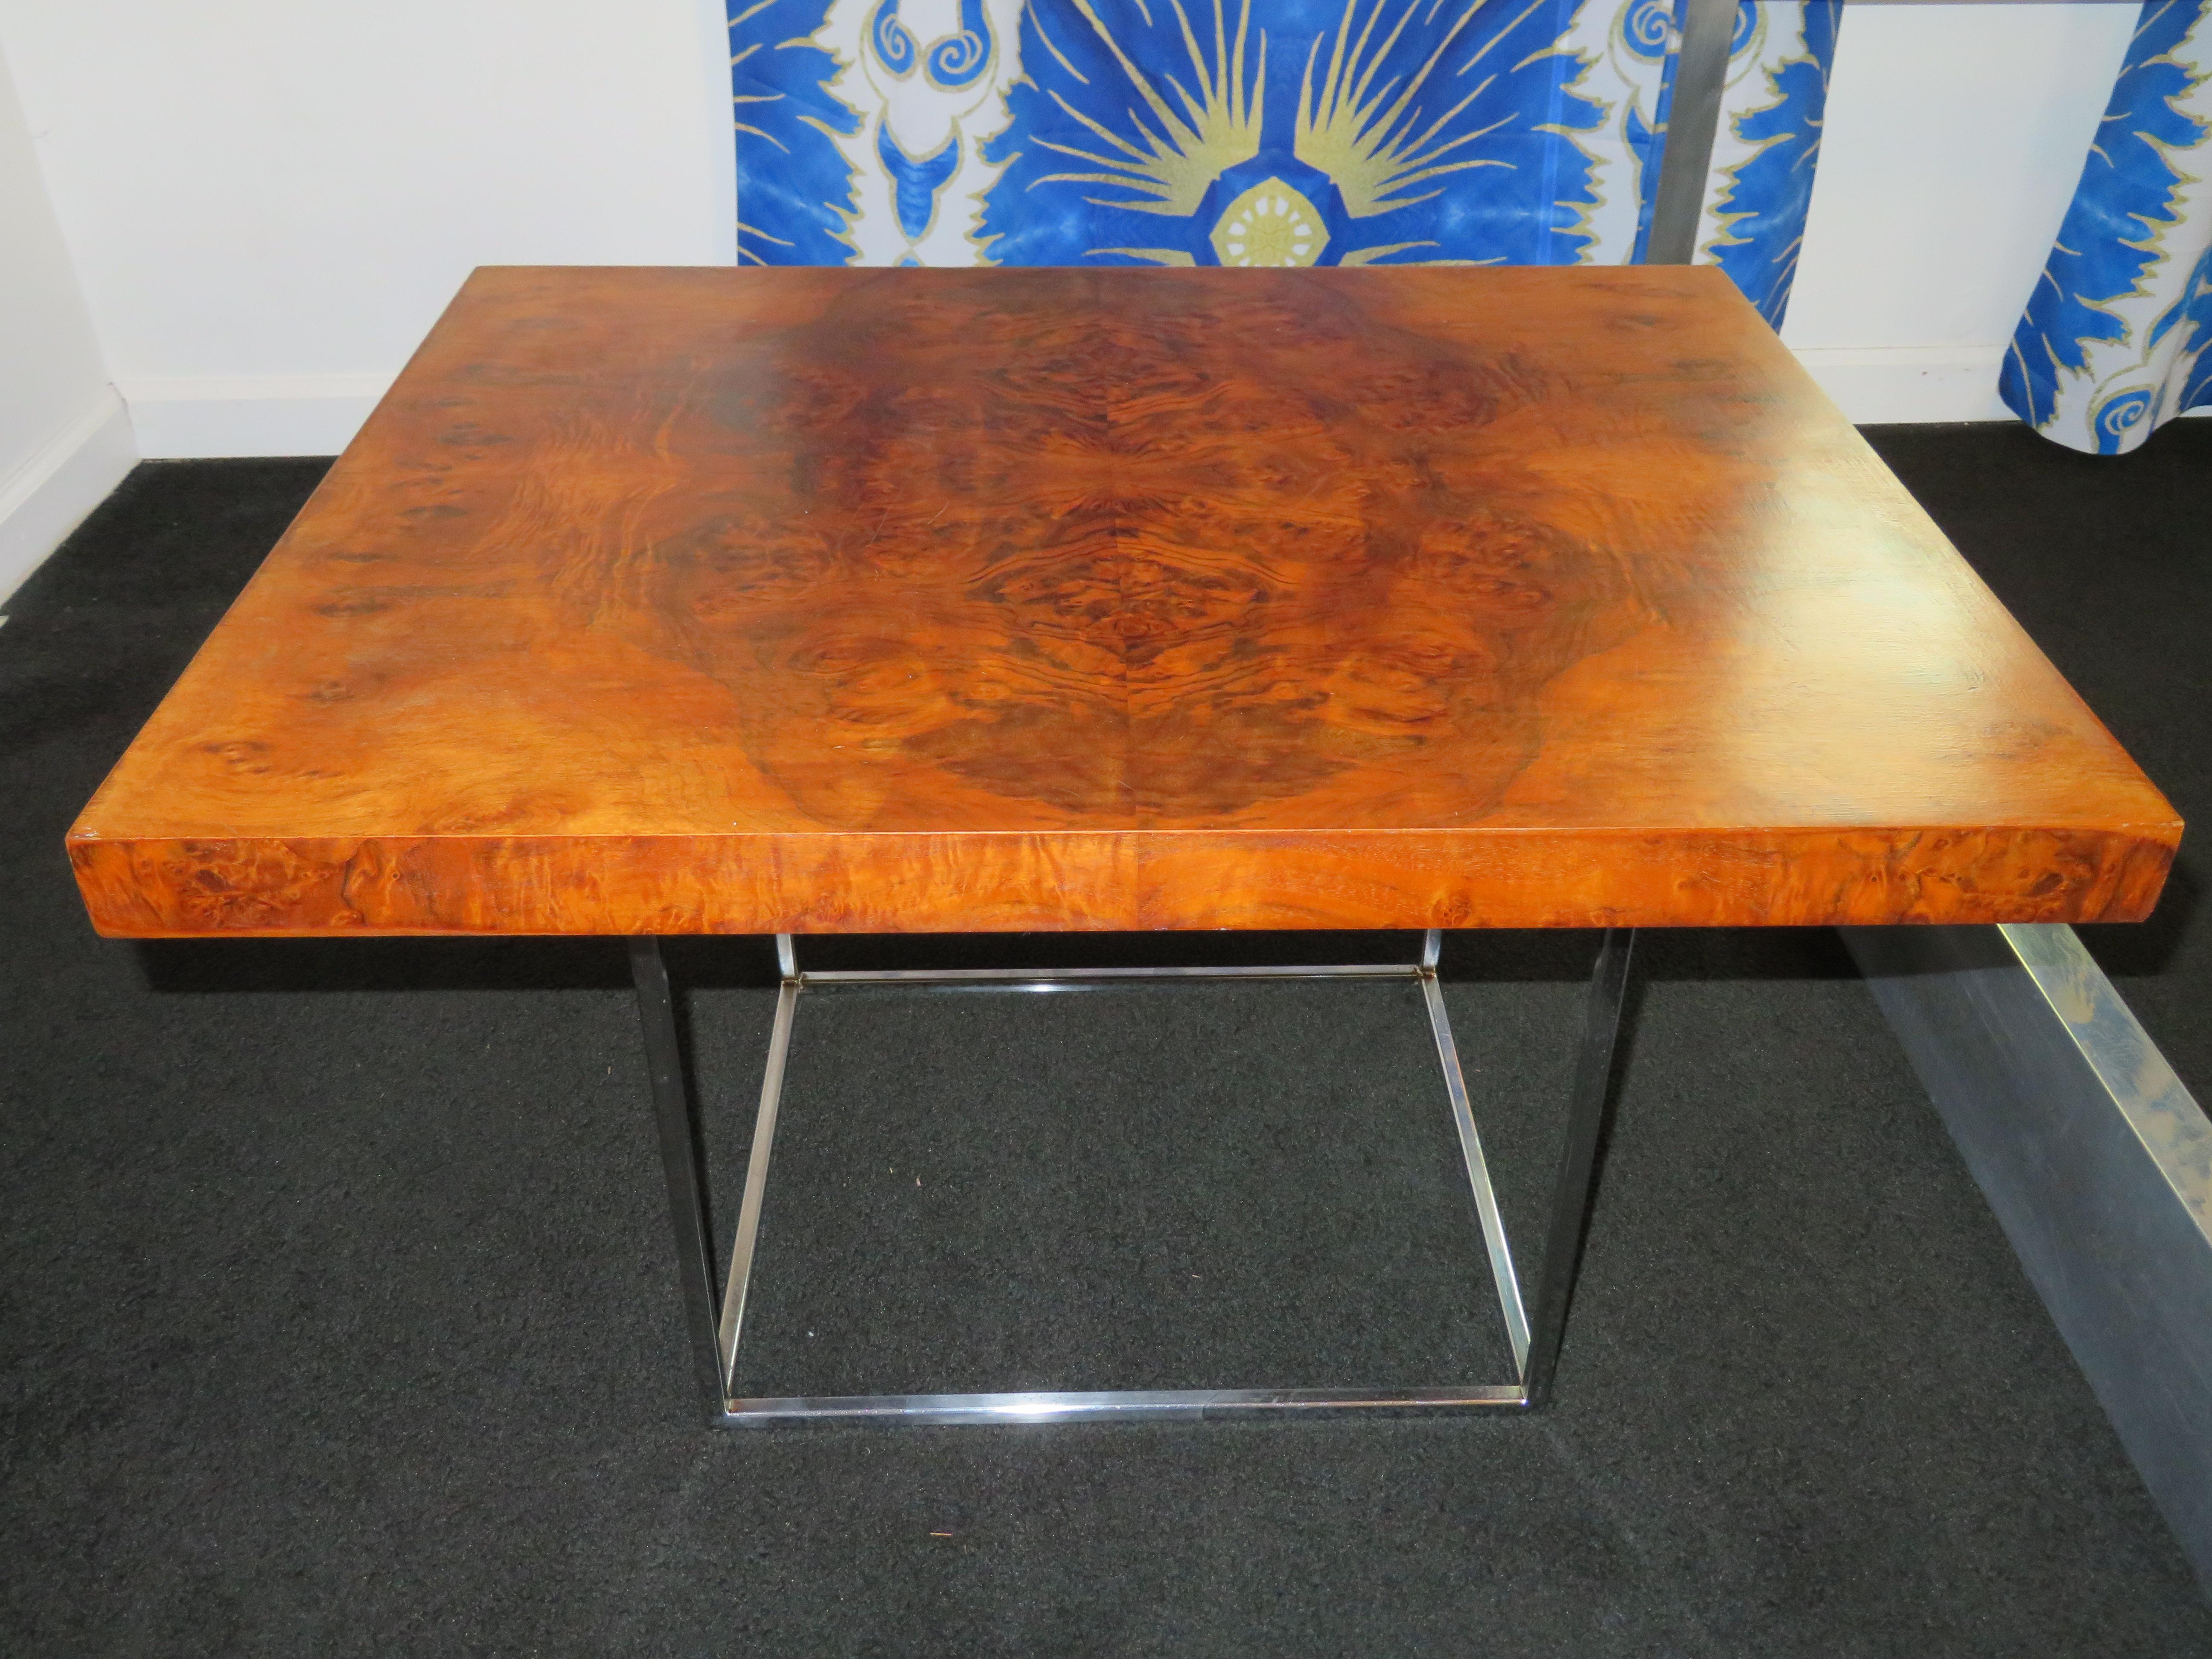 Fantastic rare burled walnut Milo Baughman side table with thin chrome frame. This table is in very nice vintage condition-top looks great! The thin chrome frame is also in very nice condition with a bright mirrored finish. This is a very rare